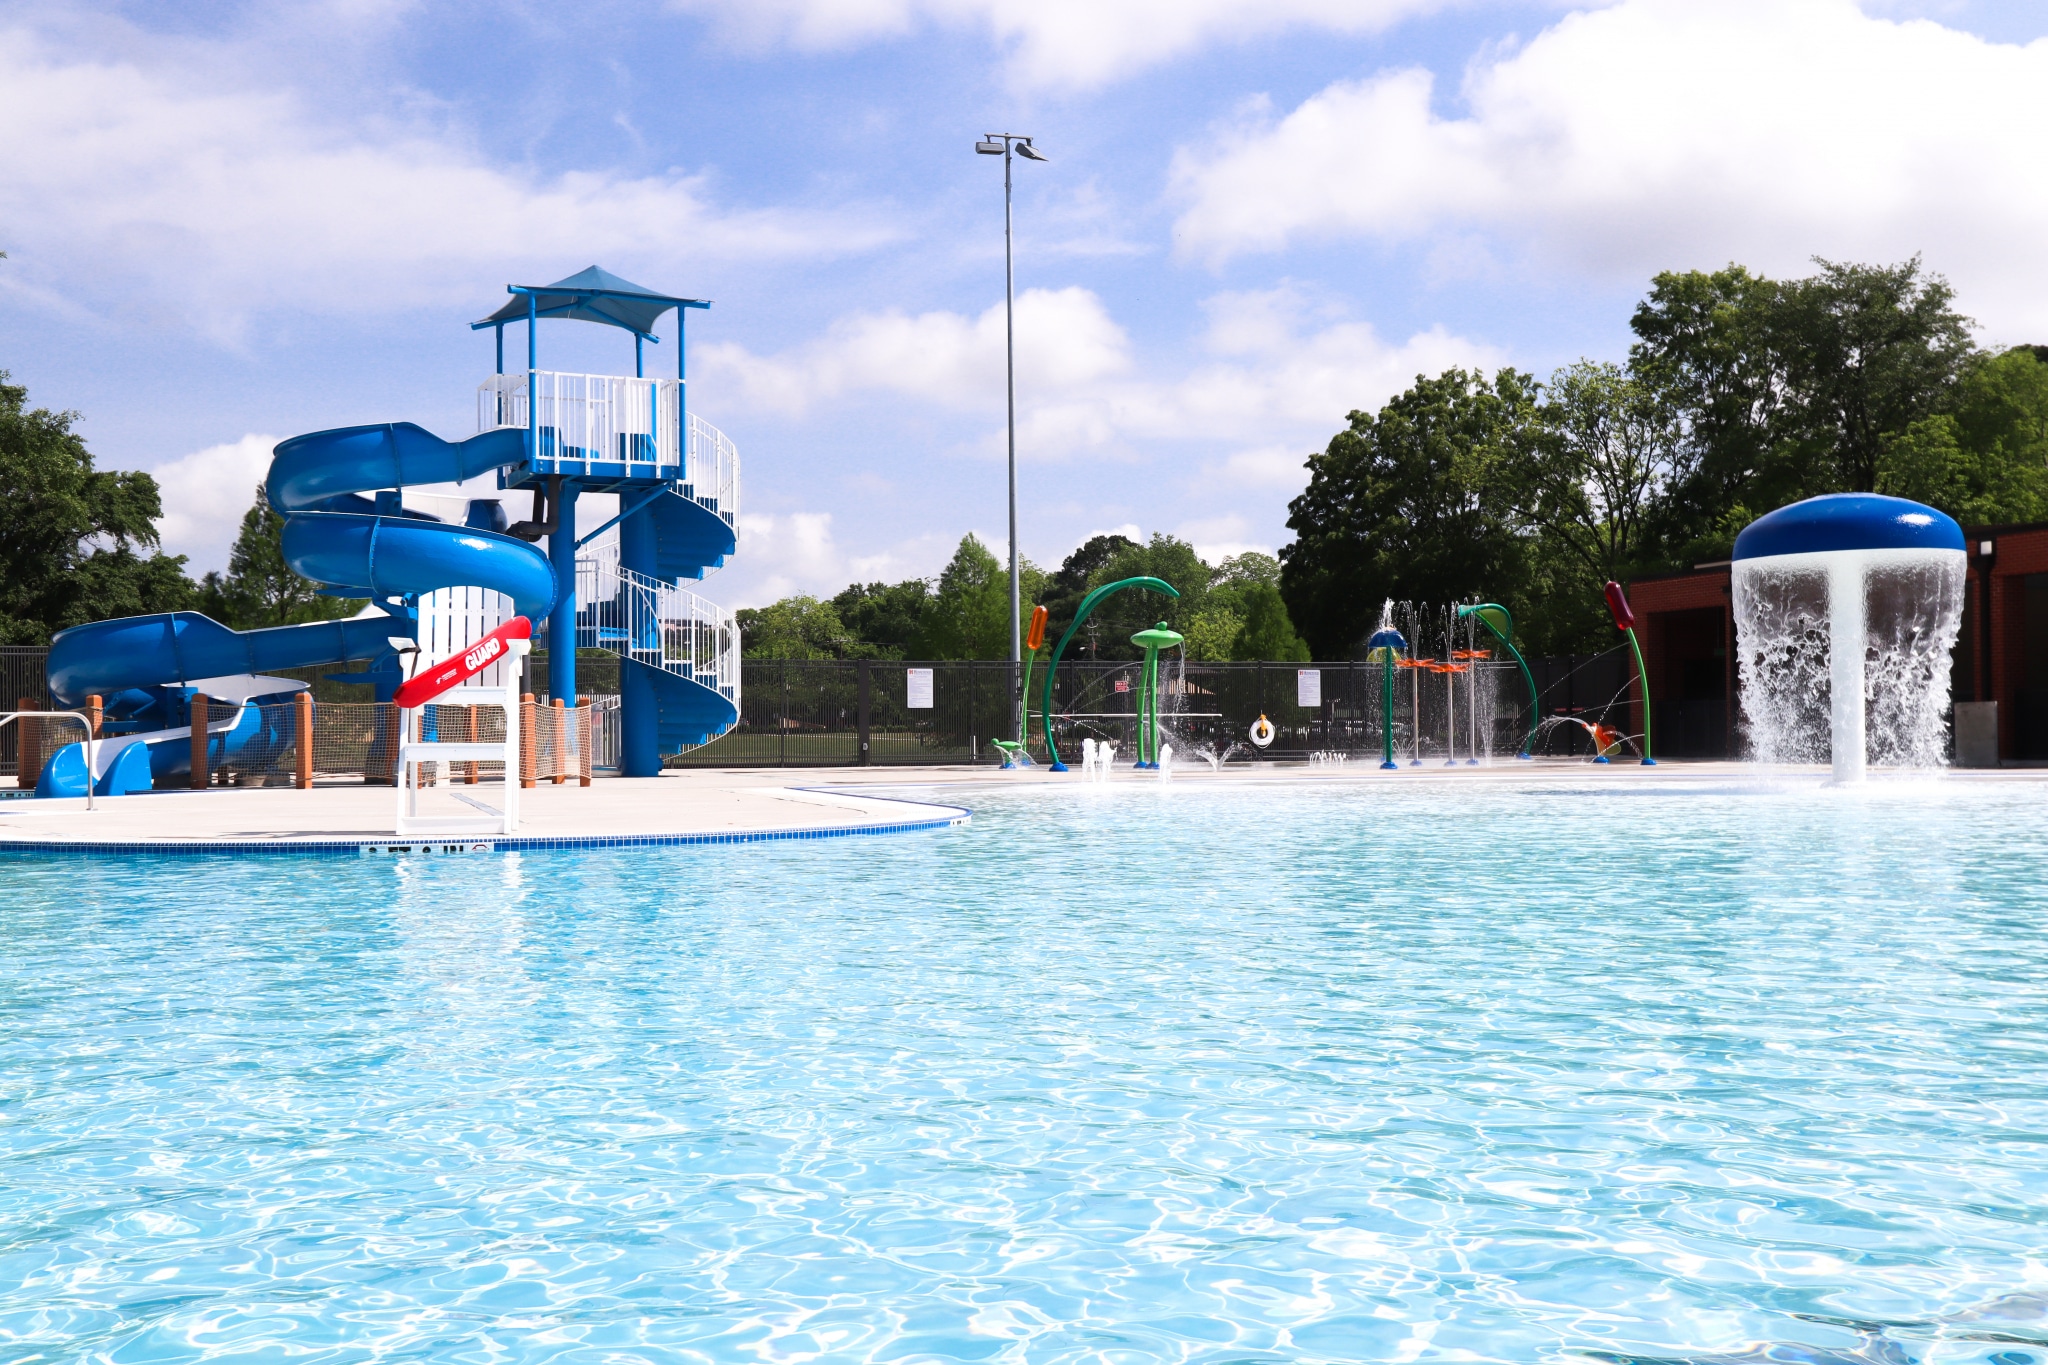 Homewood Community pool will open to the citizens of Homewood Memorial Day weekend. The splash pad is open now! (Photo by Christine Hull for Bham Now)